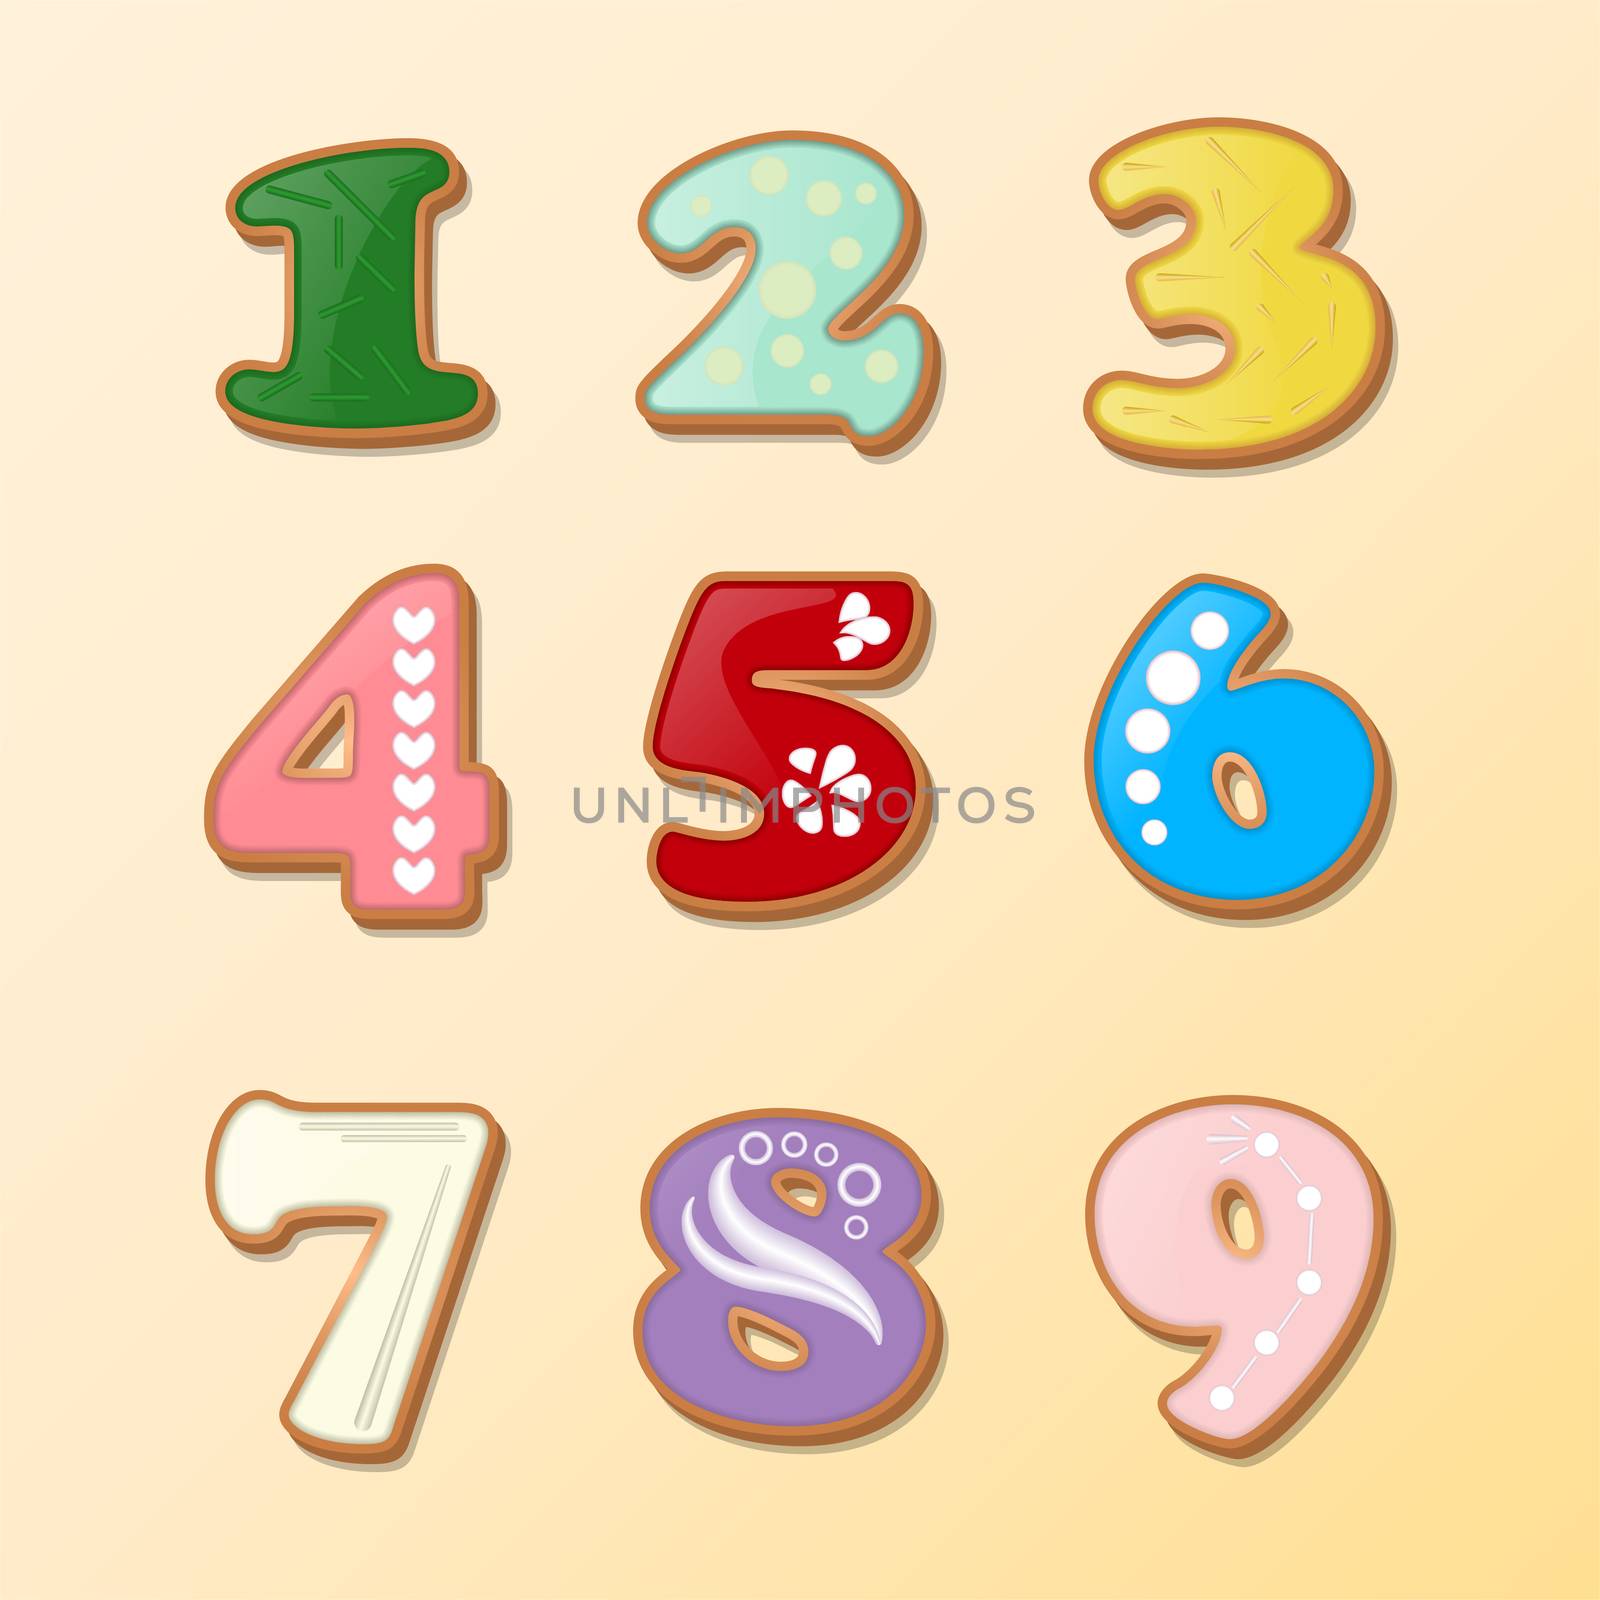 dial on a light background and numbers in the form of cookies. illustration